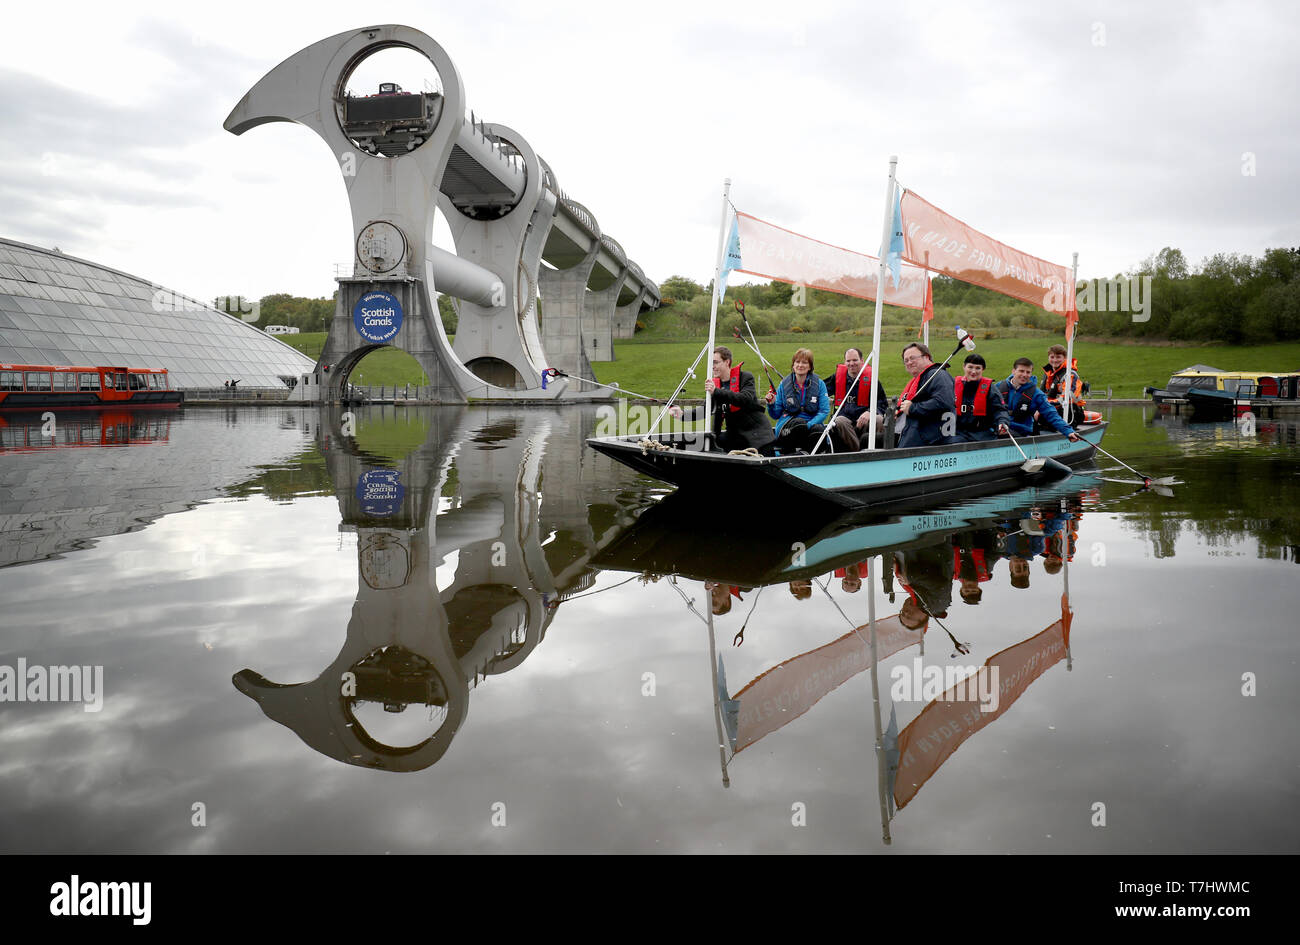 A plastic fishing boat created by environmental charity Hubbub and made of 99% recycled plastic is launched on the canal at the Falkirk Wheel, before traveling around Scotland to raise awareness of pollution in the country's waters. Stock Photo